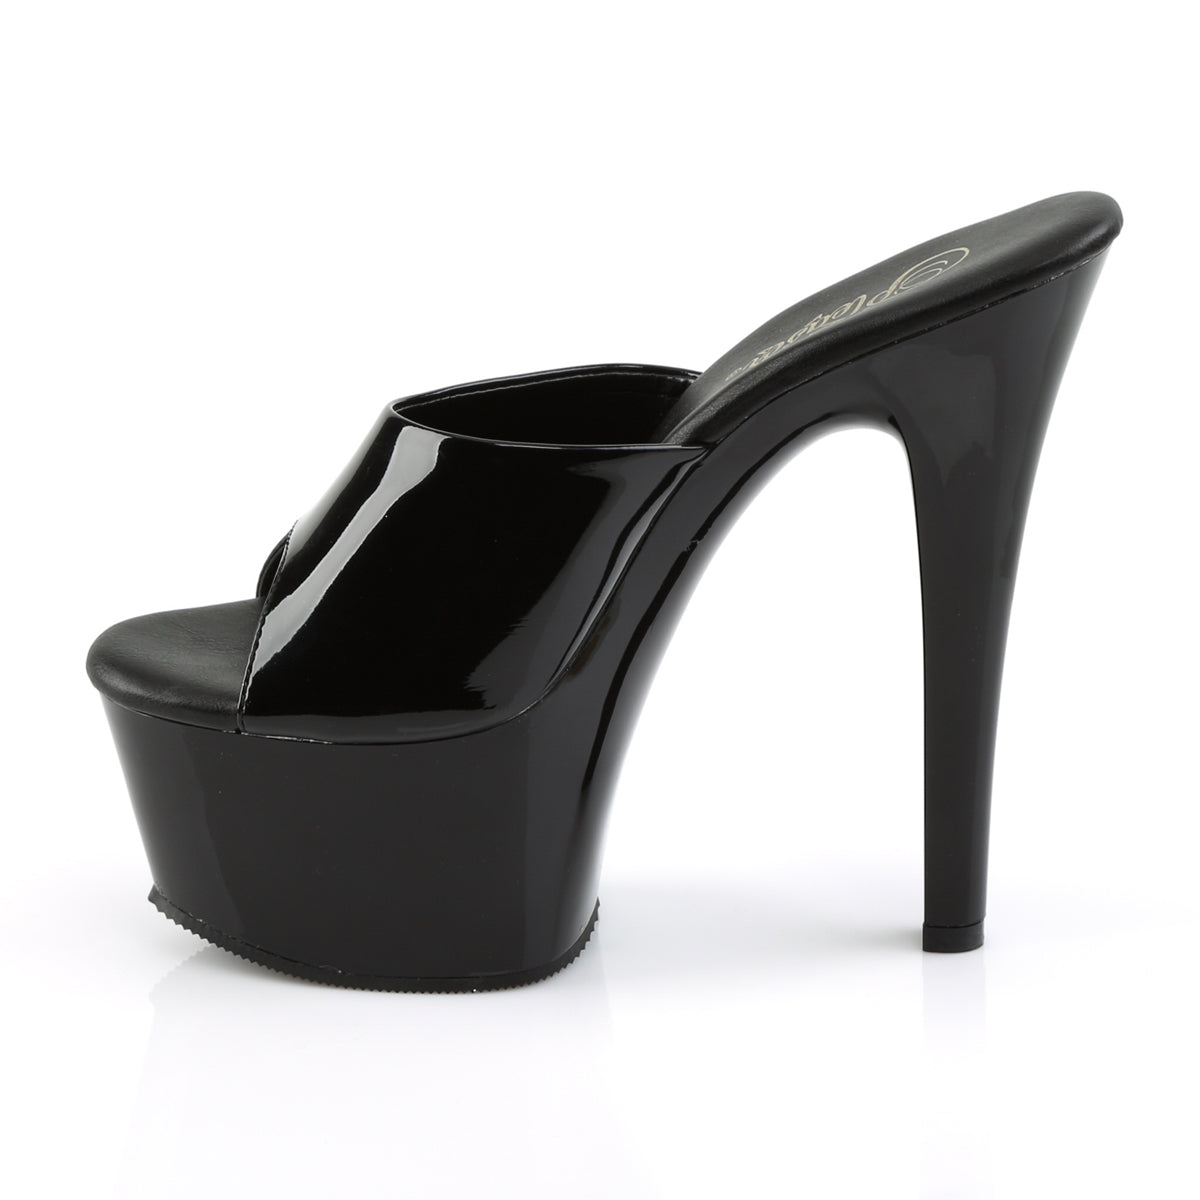 ASPIRE-601 Sexy 6" Heel Black Patent Pole Dancing Shoes-Pleaser- Sexy Shoes Pole Dance Heels